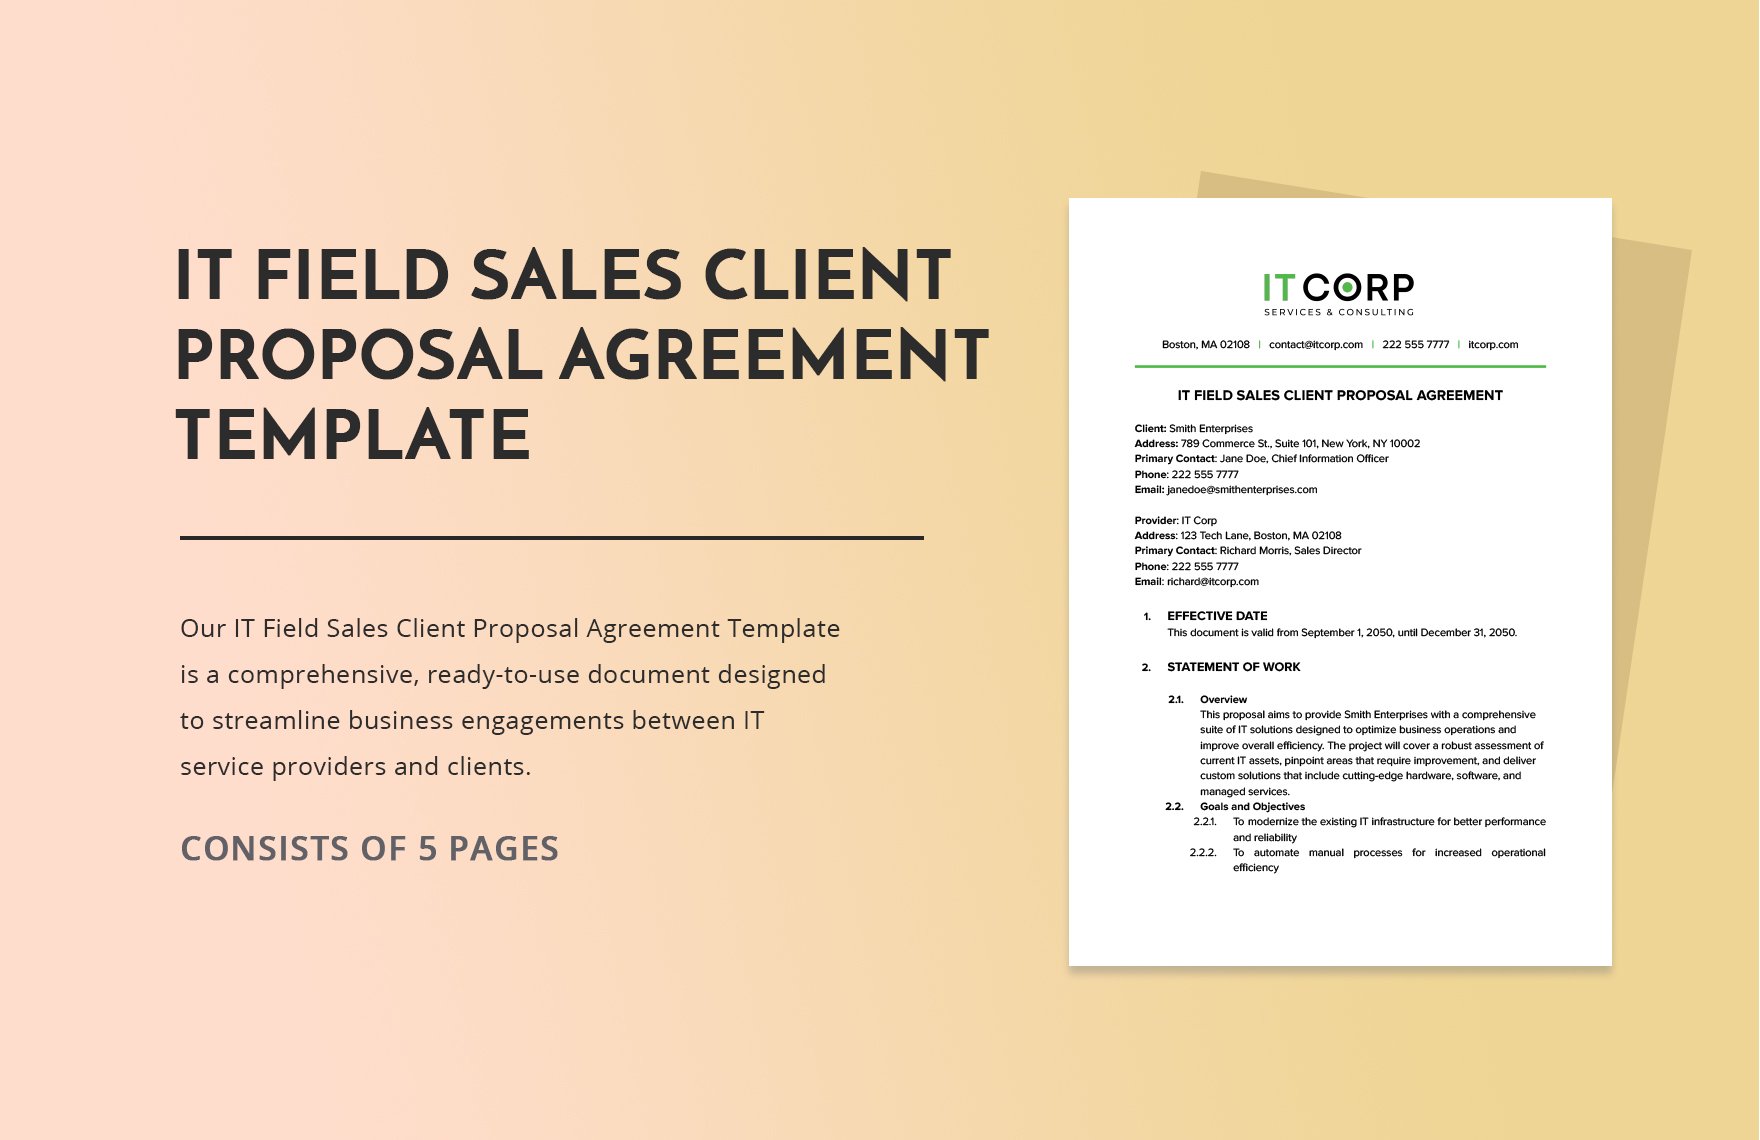 IT Field Sales Client Proposal Agreement Template